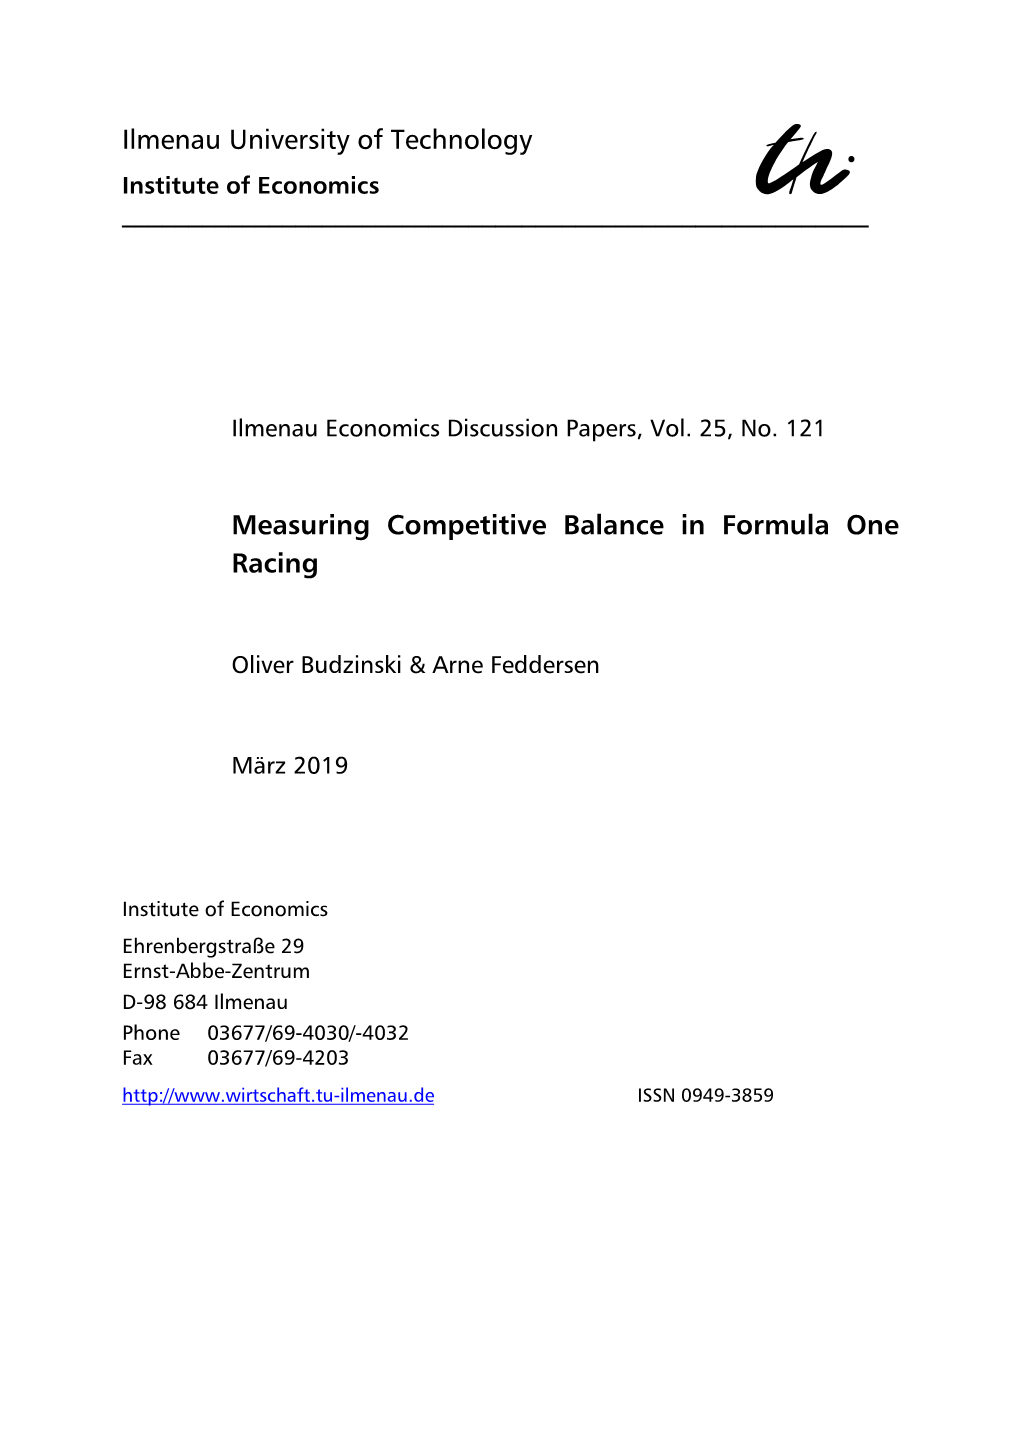 Measuring Competitive Balance in Formula One Racing